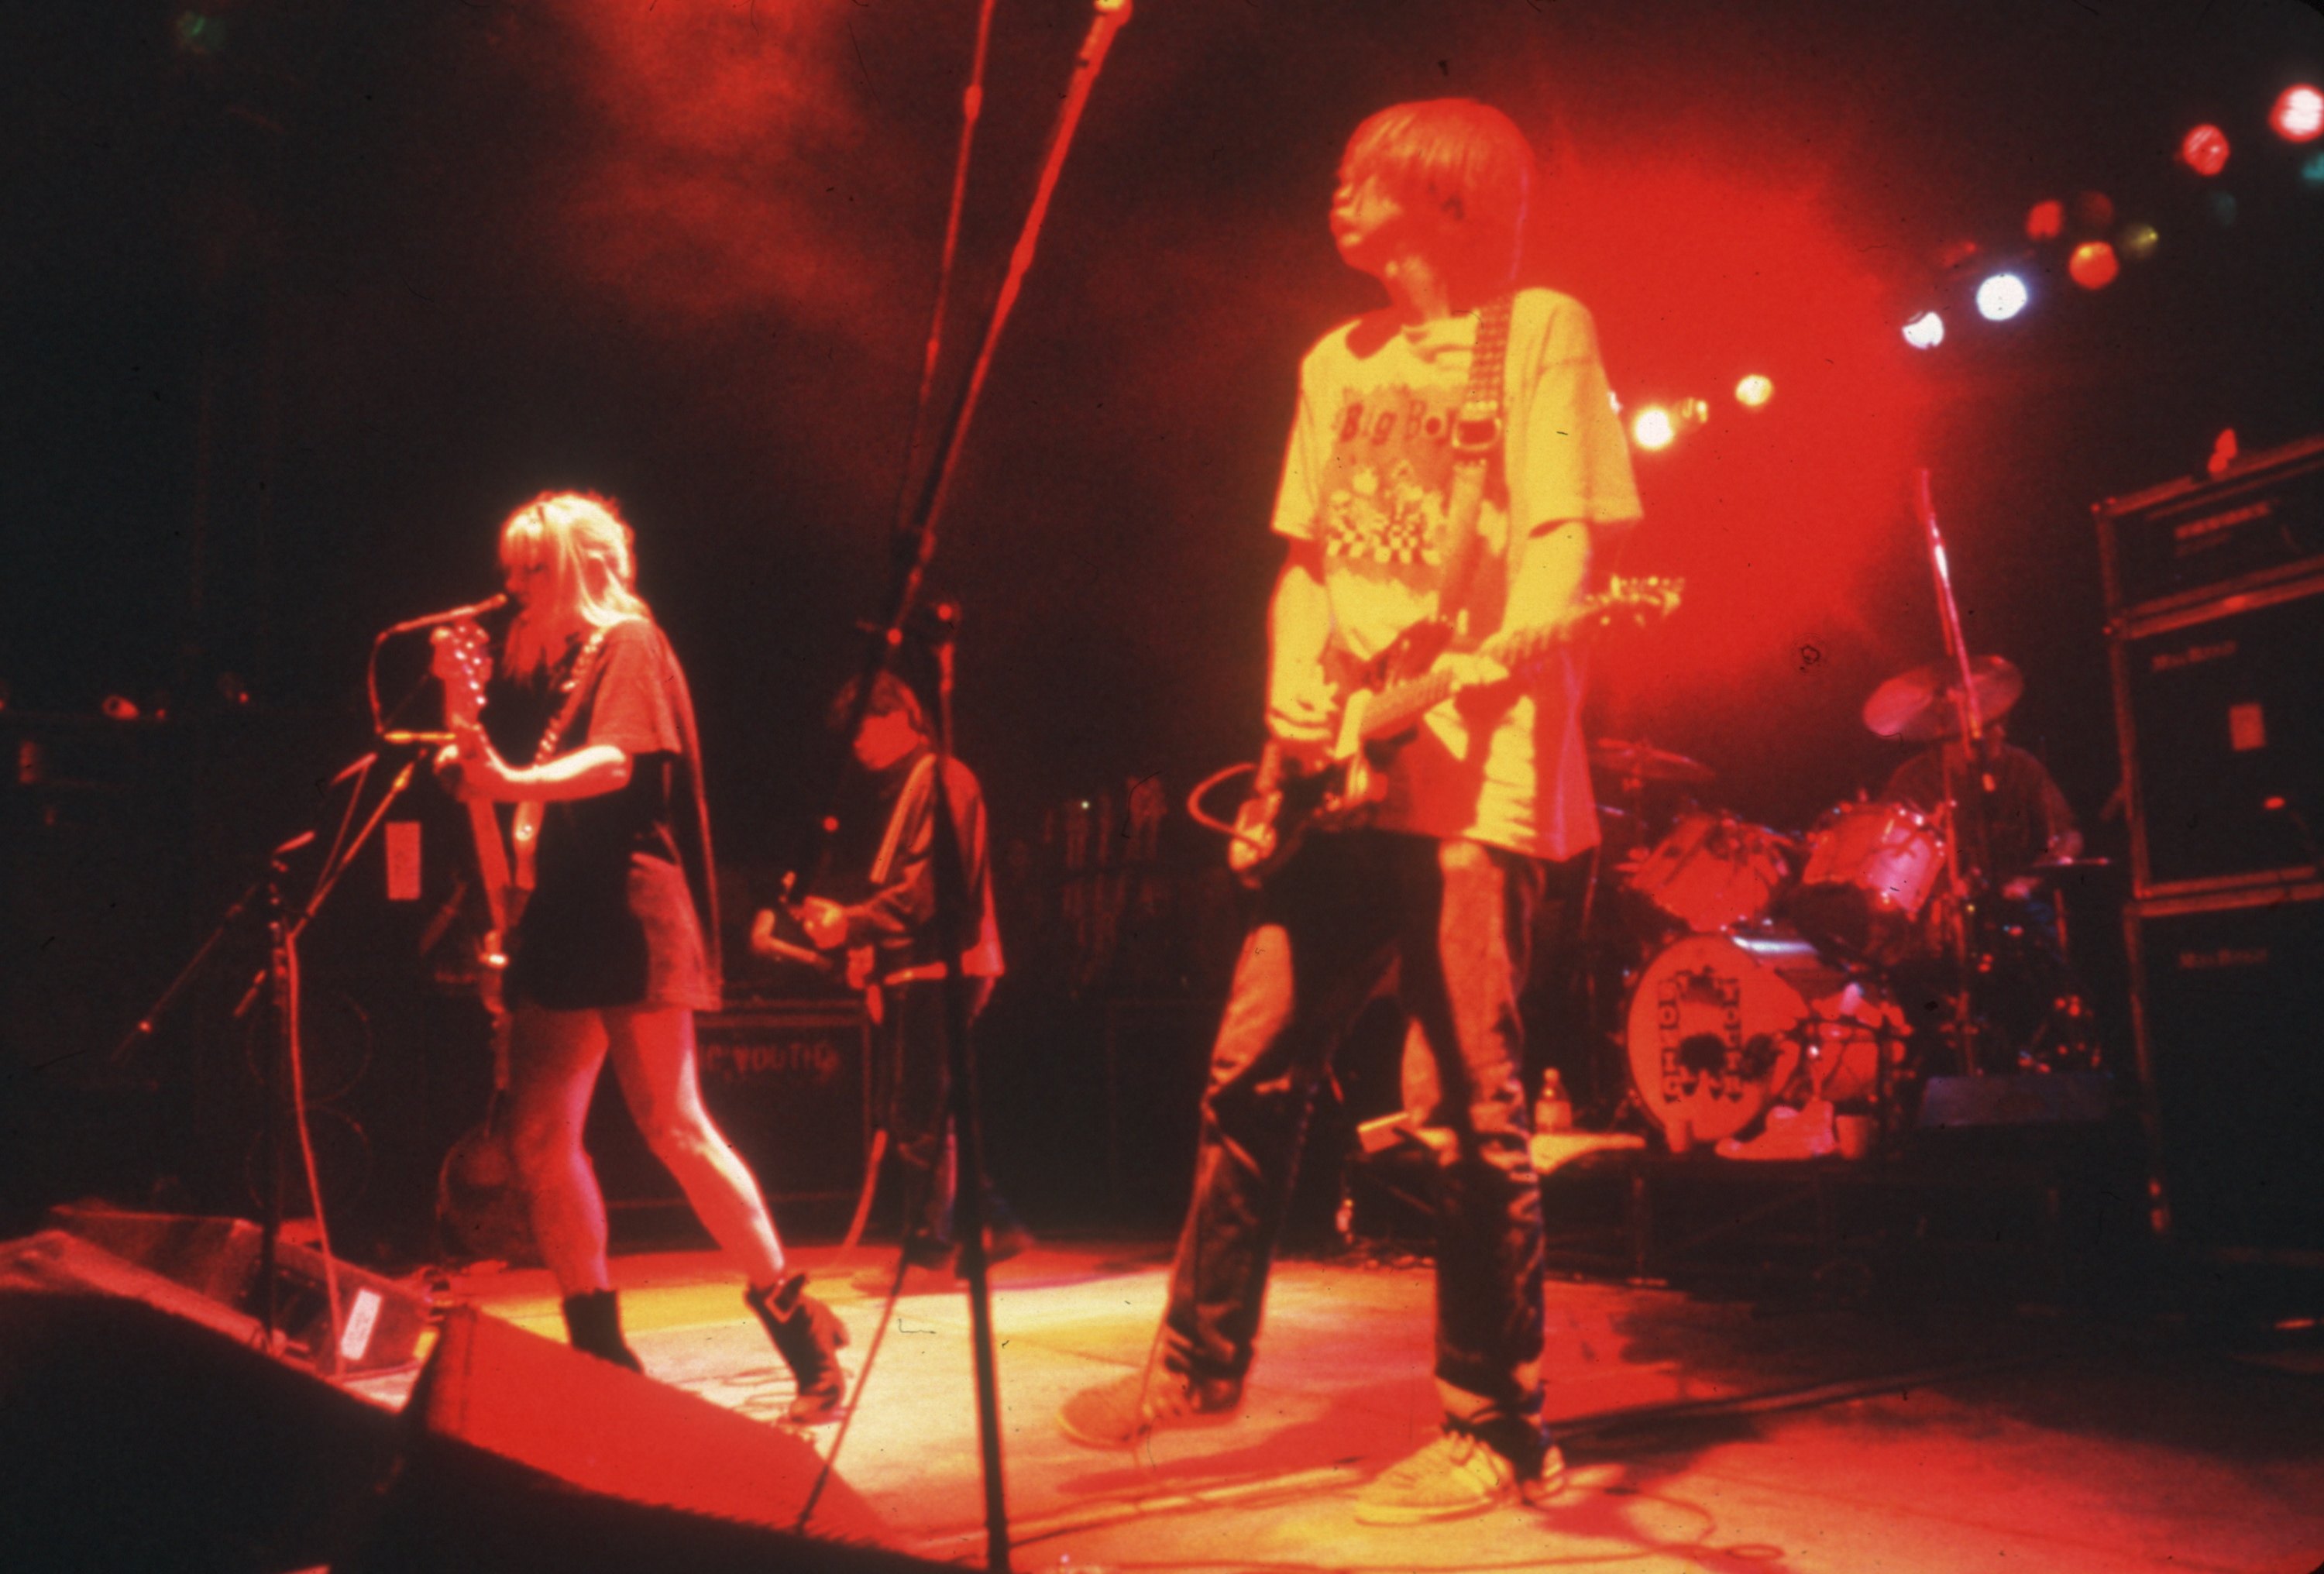 Don't Give Me Your Soul: The Oral History of Sonic Youth's <i></noscript>
<p><strong>THE LEGACY</strong></p>
<p><strong>Moore:</strong> Entering into the ’90s, to me, it was super interesting to see young people who were in the audiences for bands like us and Butthole Surfers and Meat Puppets and Black Flag. I’d start to see these new creative voices coming up in the ’90s like <a href=